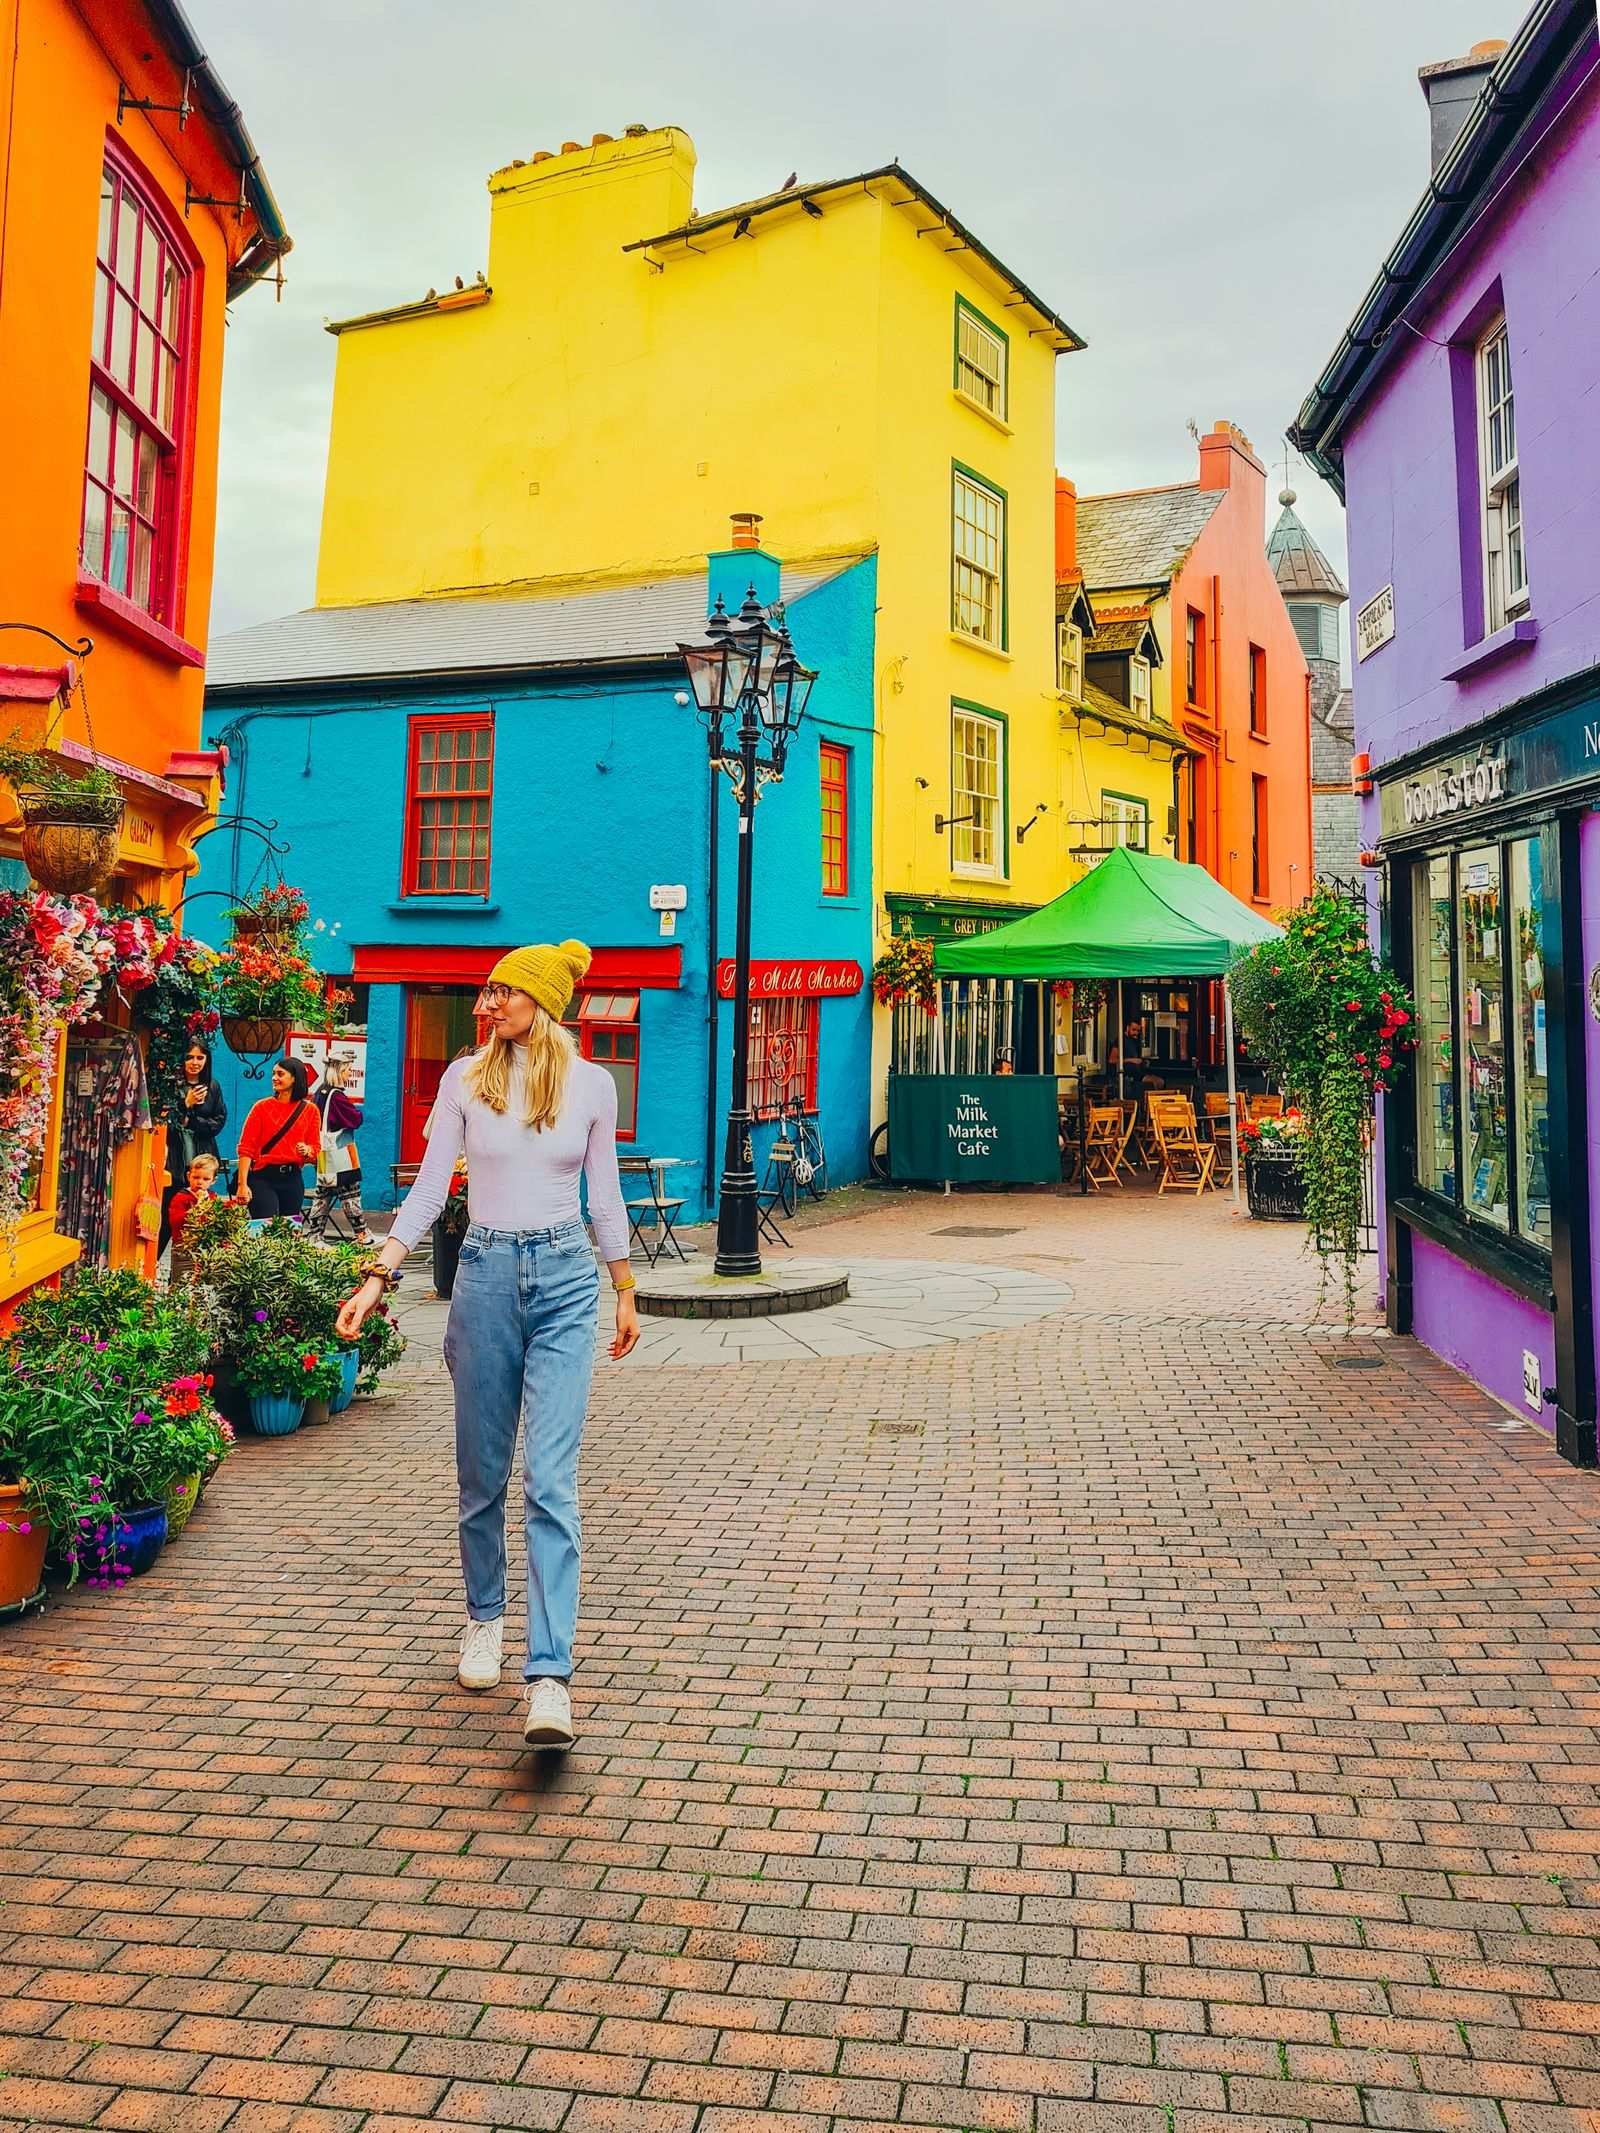 Girl waling down brick street surrounded by many colourful buildings